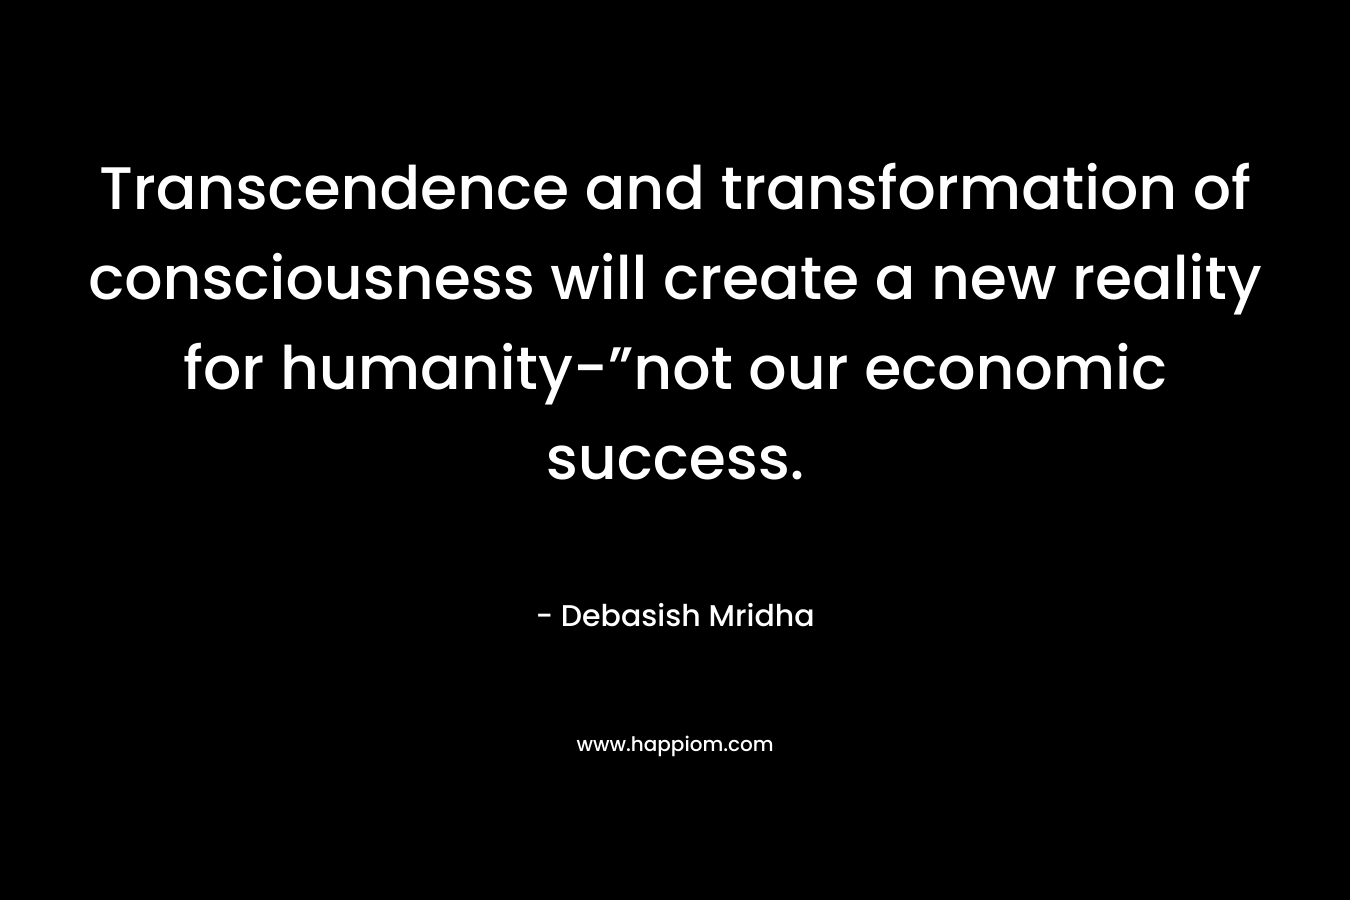 Transcendence and transformation of consciousness will create a new reality for humanity-”not our economic success.